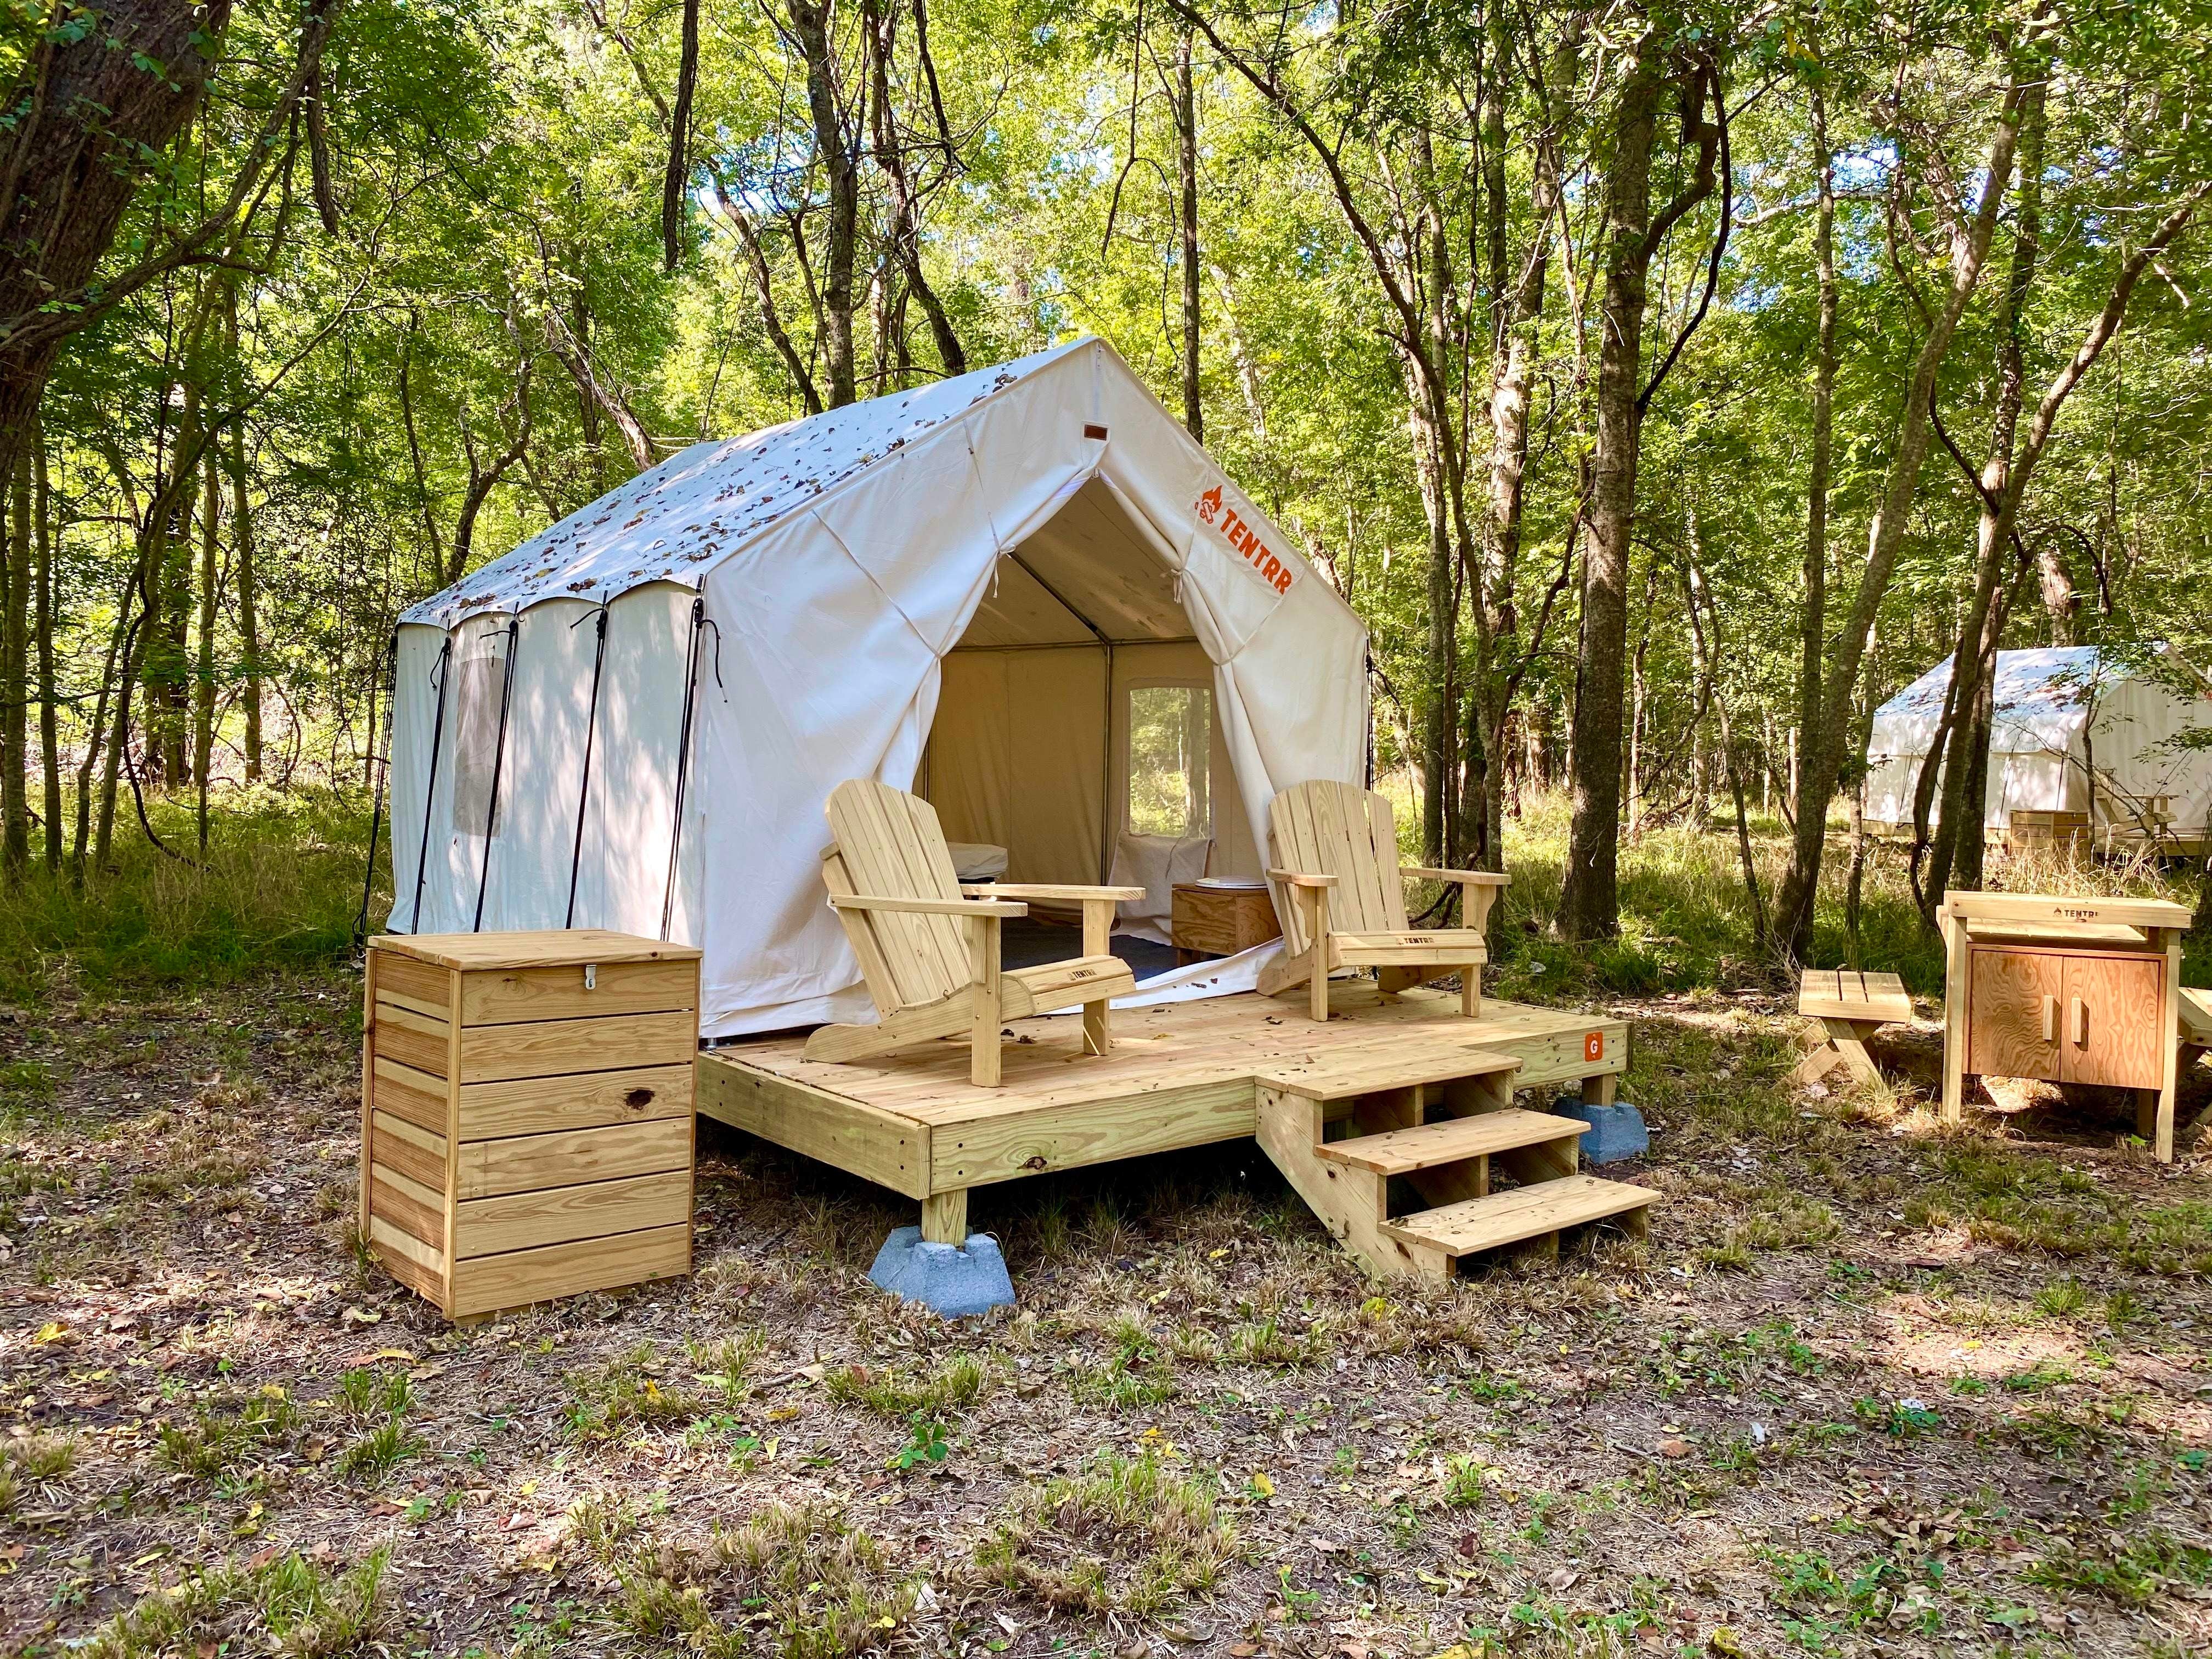 Camper submitted image from Tentrr State Park Site - Texas Brazos Bend State Park ___ Trailside G ___ Single Camp - 2